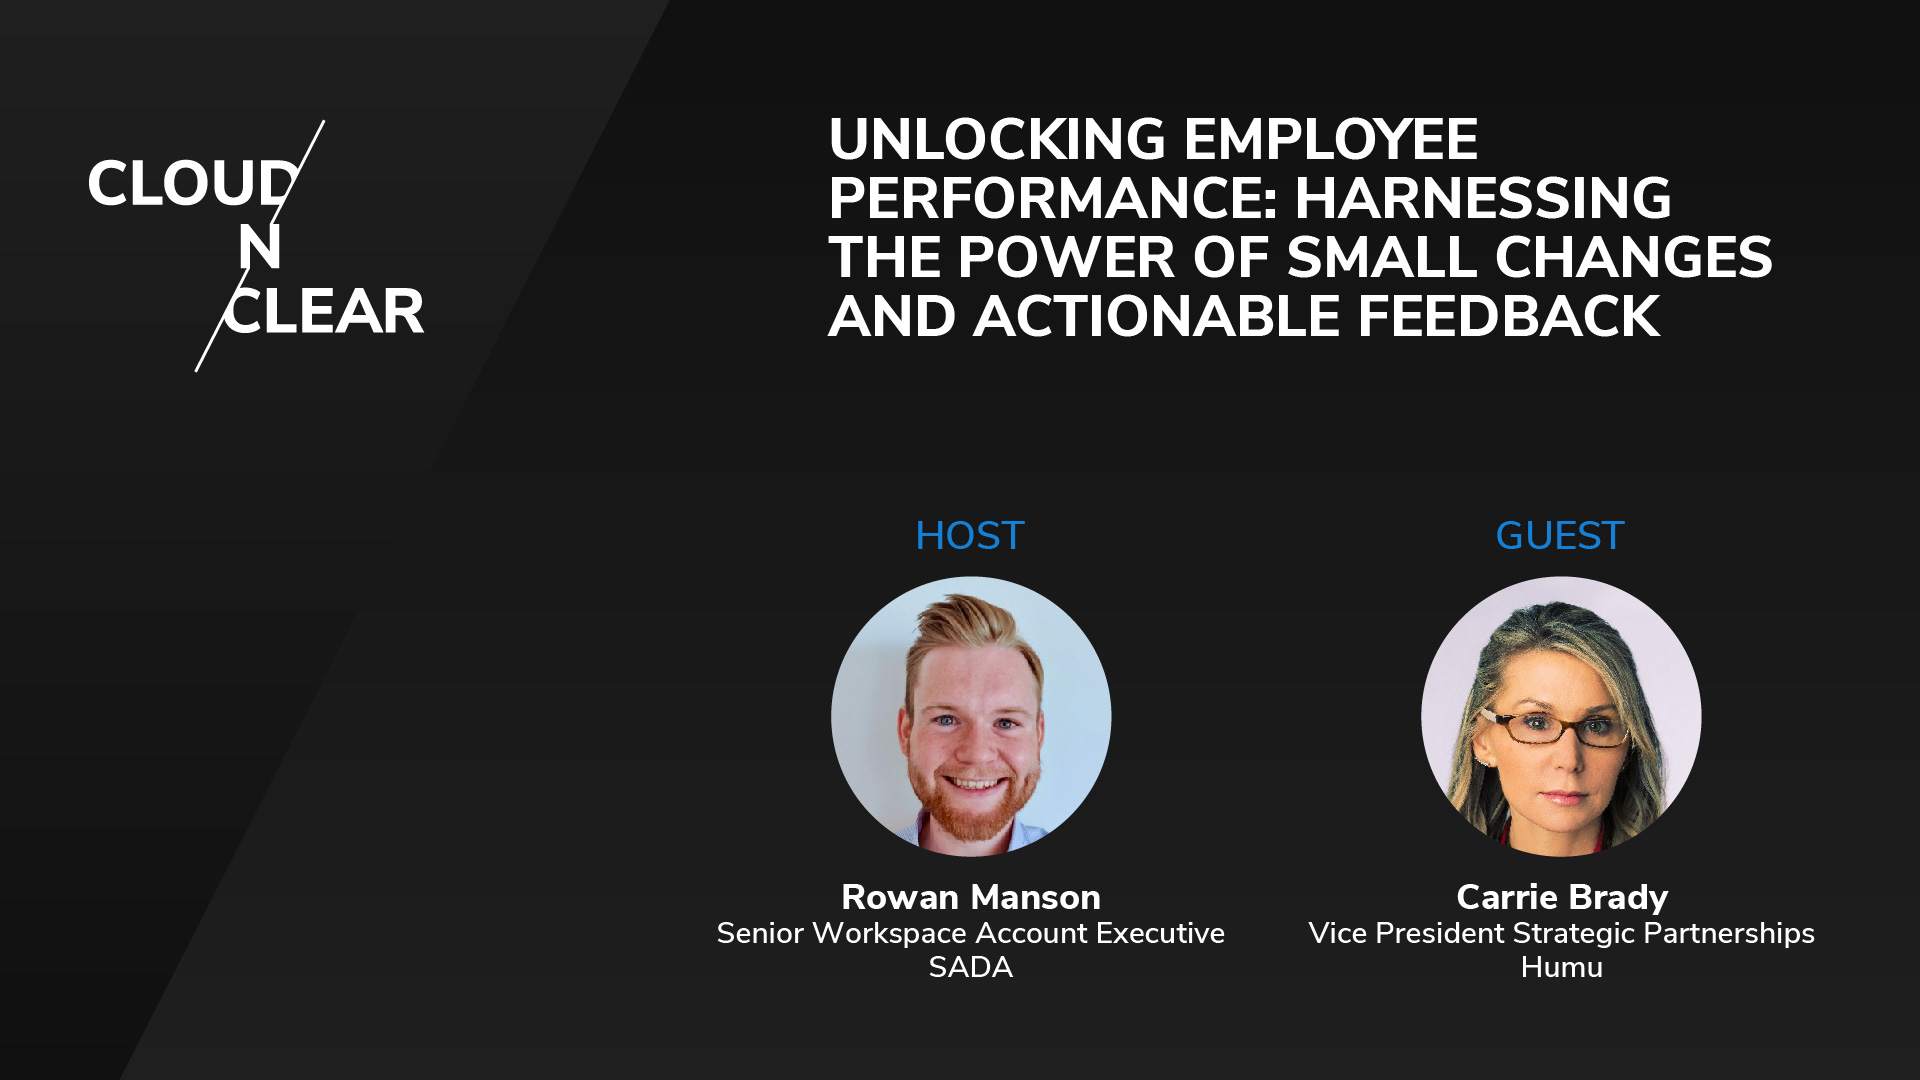 Unlocking Employee Performance: Harnessing the Power of Small Changes and Actionable Feedback